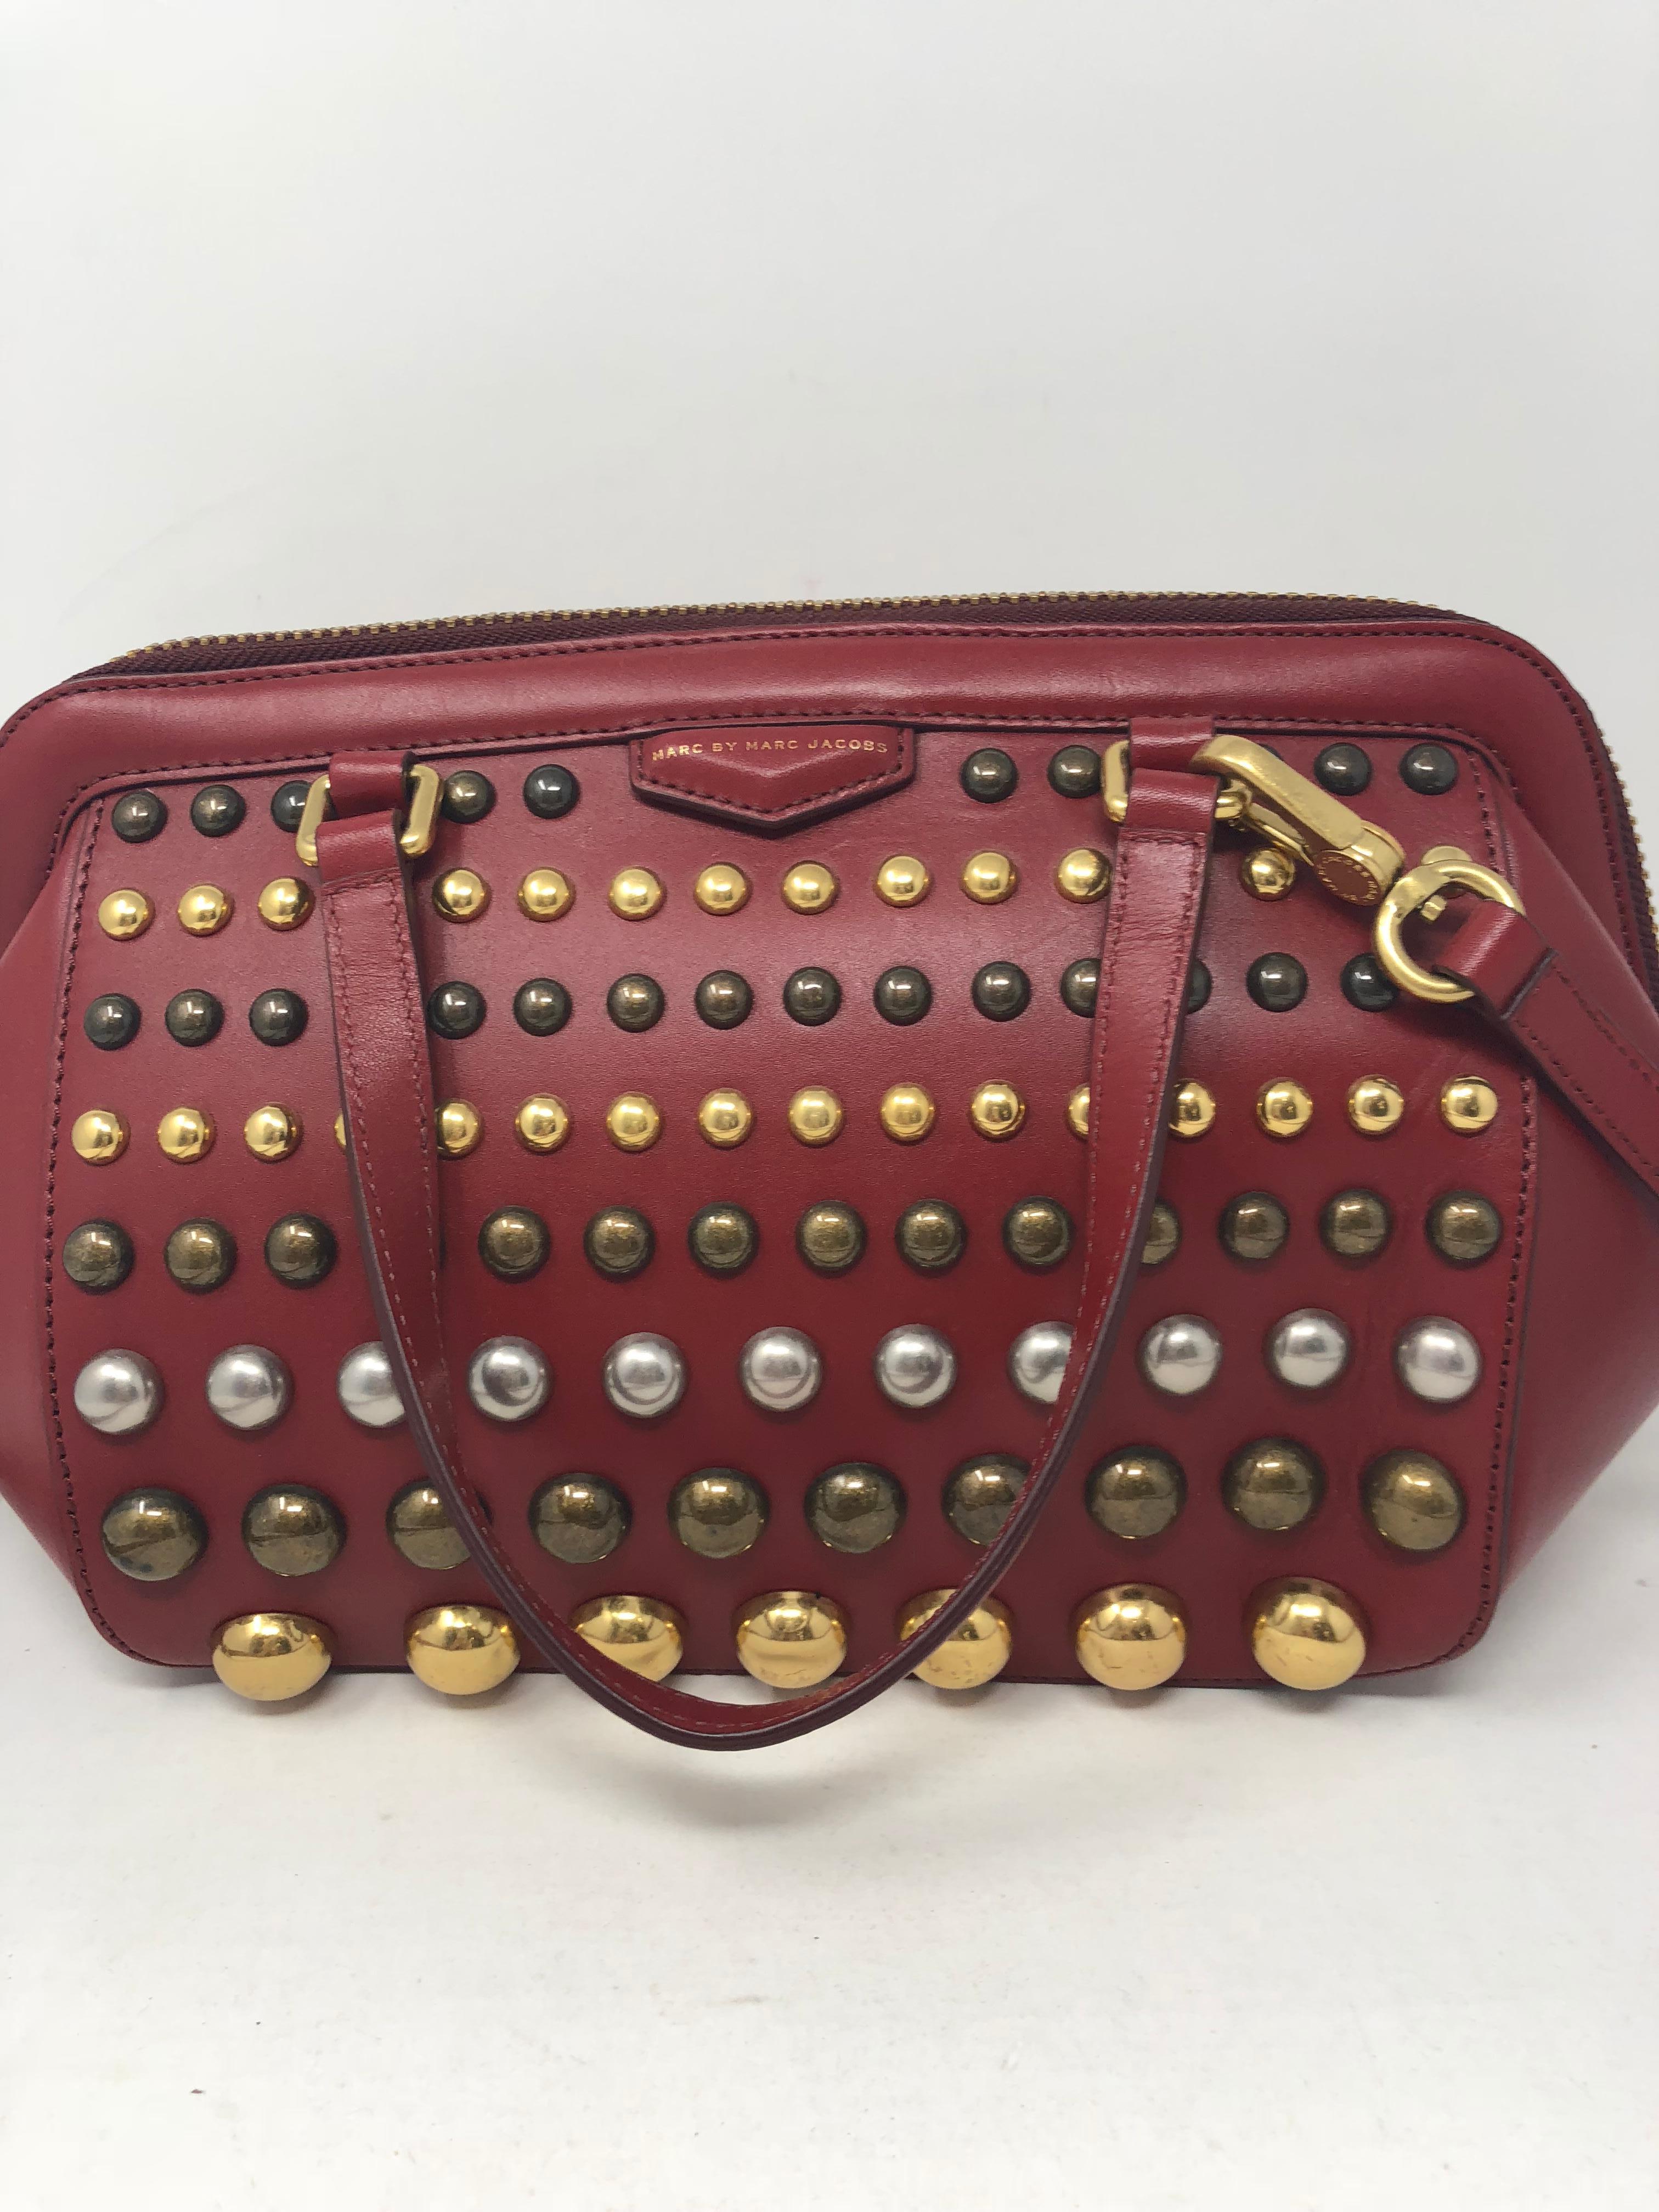 Marc Jacobs Red Studded Bag. Red leather bag with multi metal studs throughout. Never worn with original tags. Unique style with adjustable leather strap. Guaranteed authentic. 